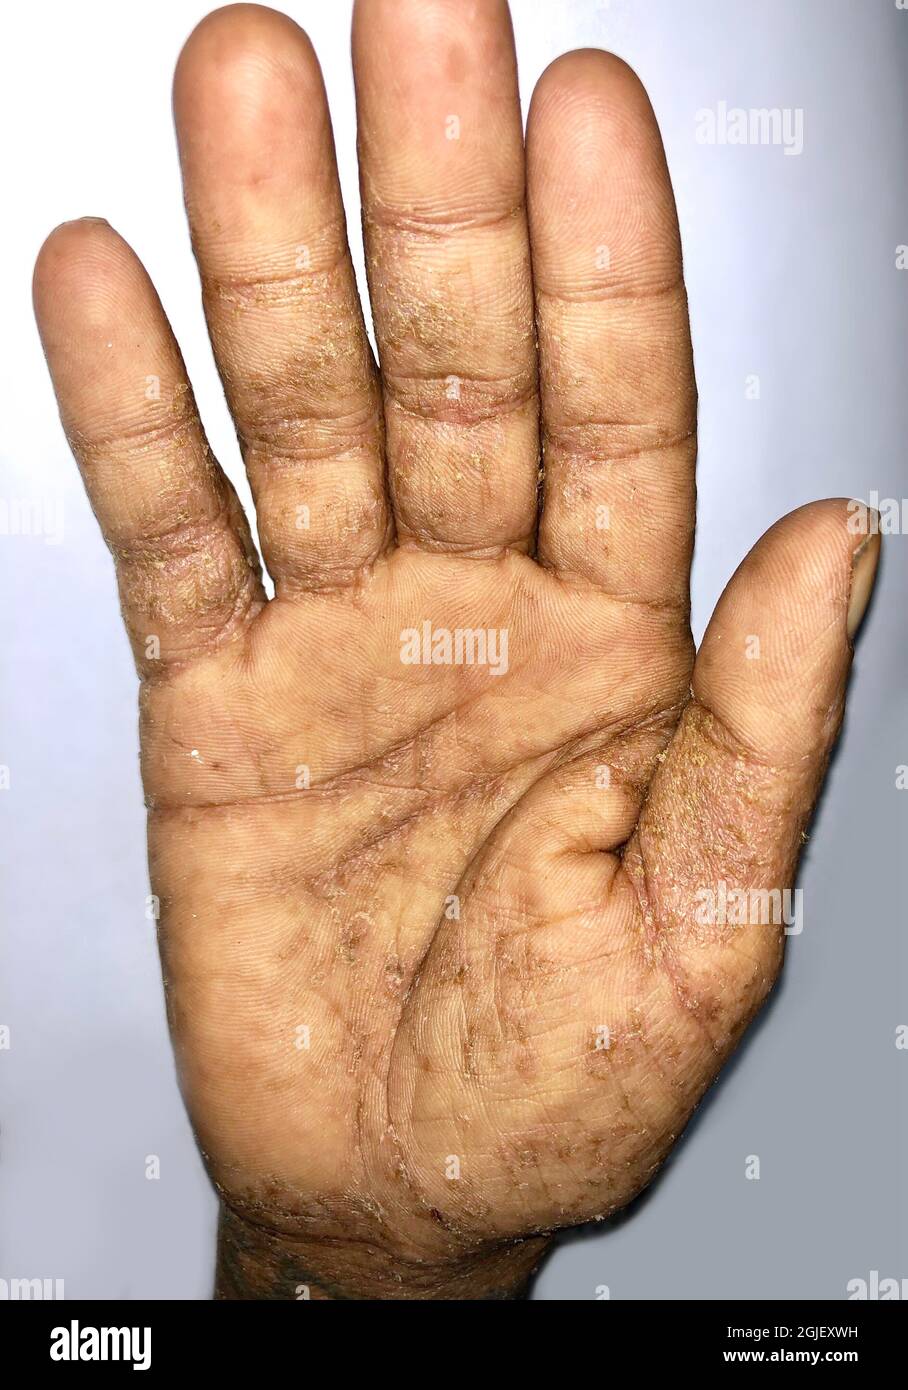 Giant scabies Infestation or Norwegian scabies in hand of Southeast Asian, Burmese man. A contagious skin condition caused by mites. Stock Photo